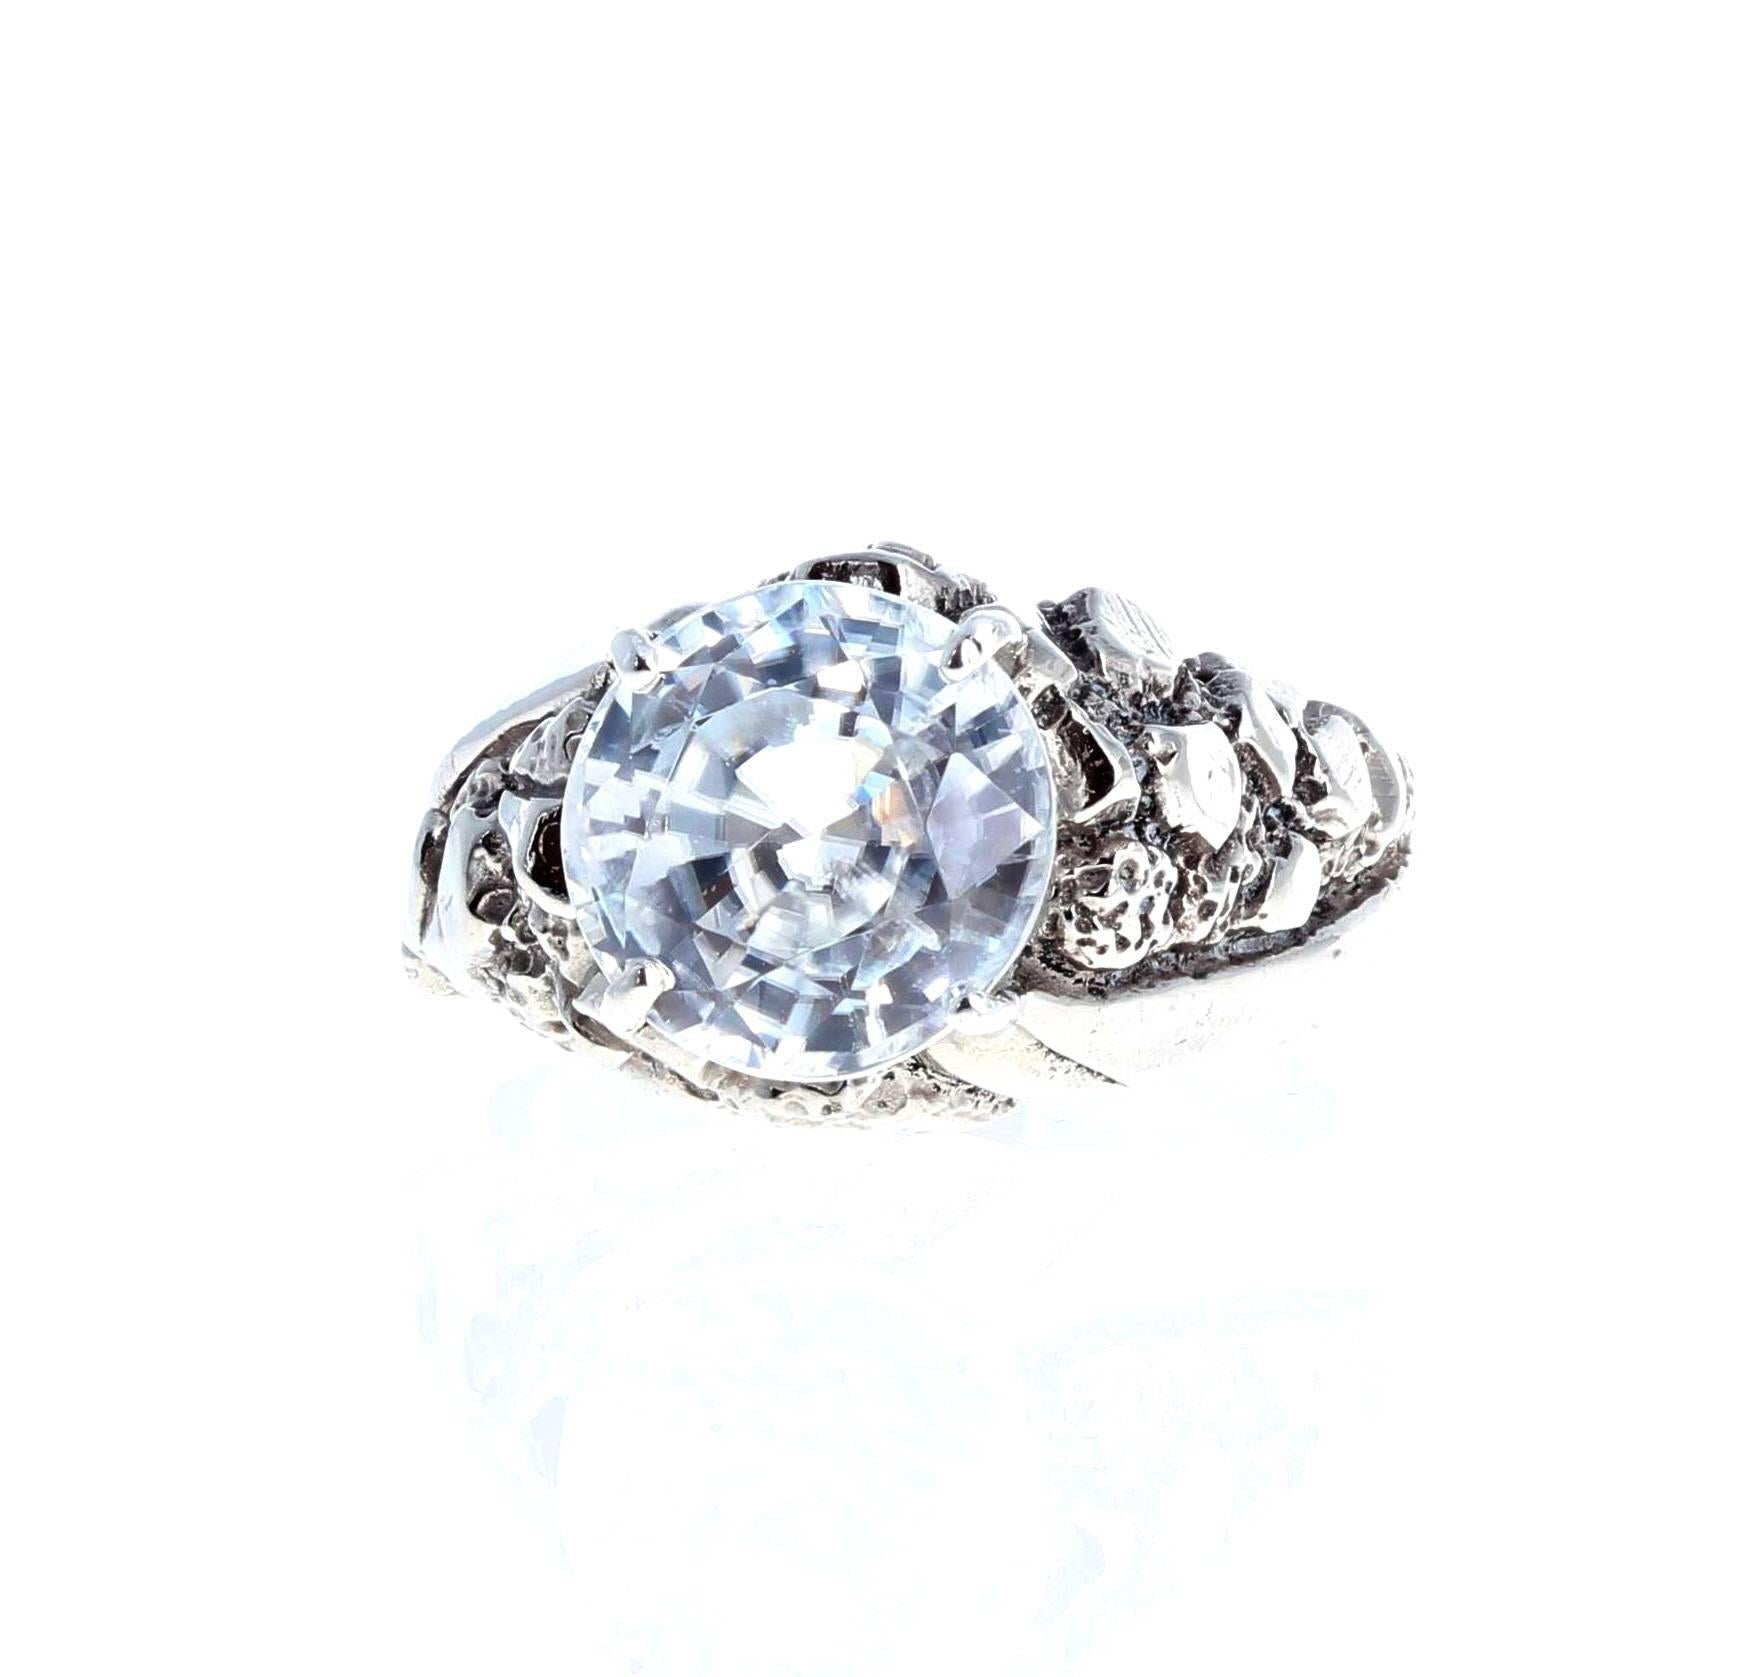 Round Cut AJD Magnificent Intense Bright 9.9 Ct Cambodian Zircon White Gold Cocktail Ring For Sale